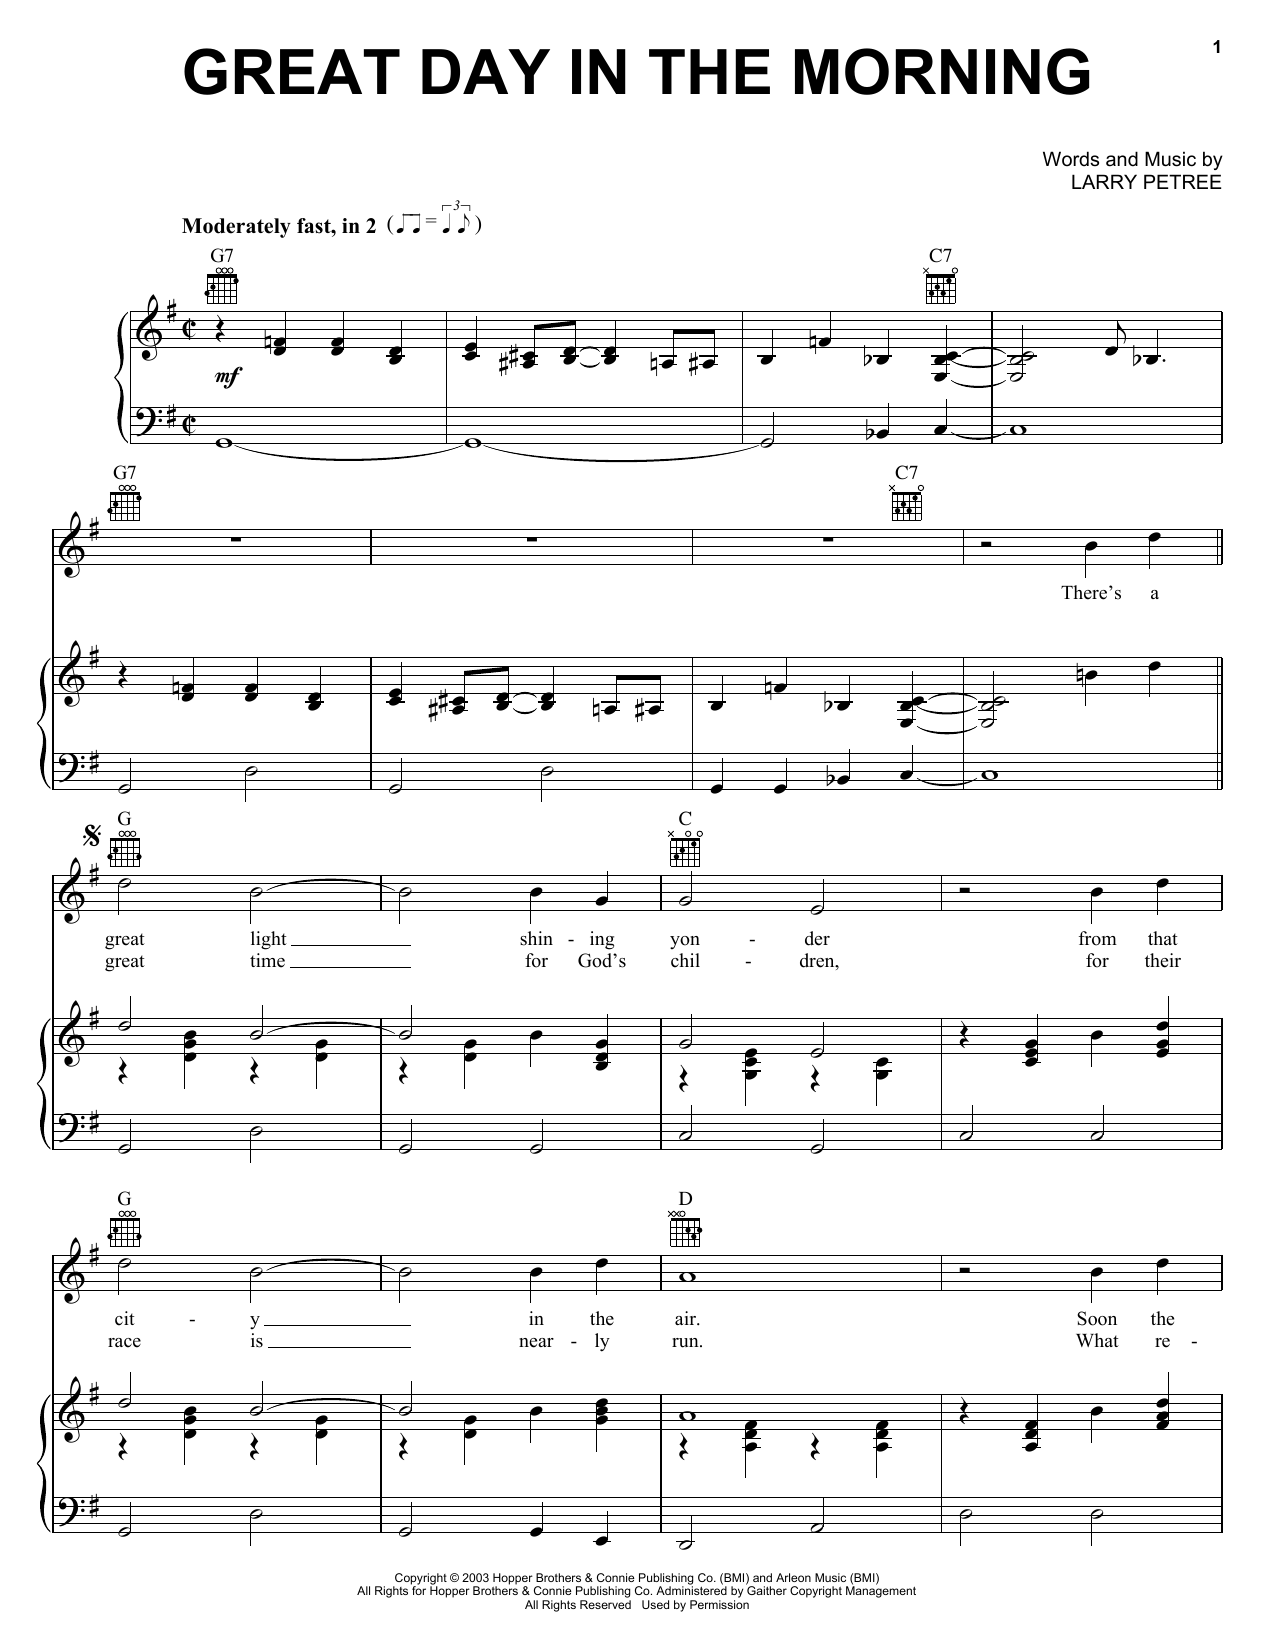 Download Larry Petree Great Day In the Morning Sheet Music